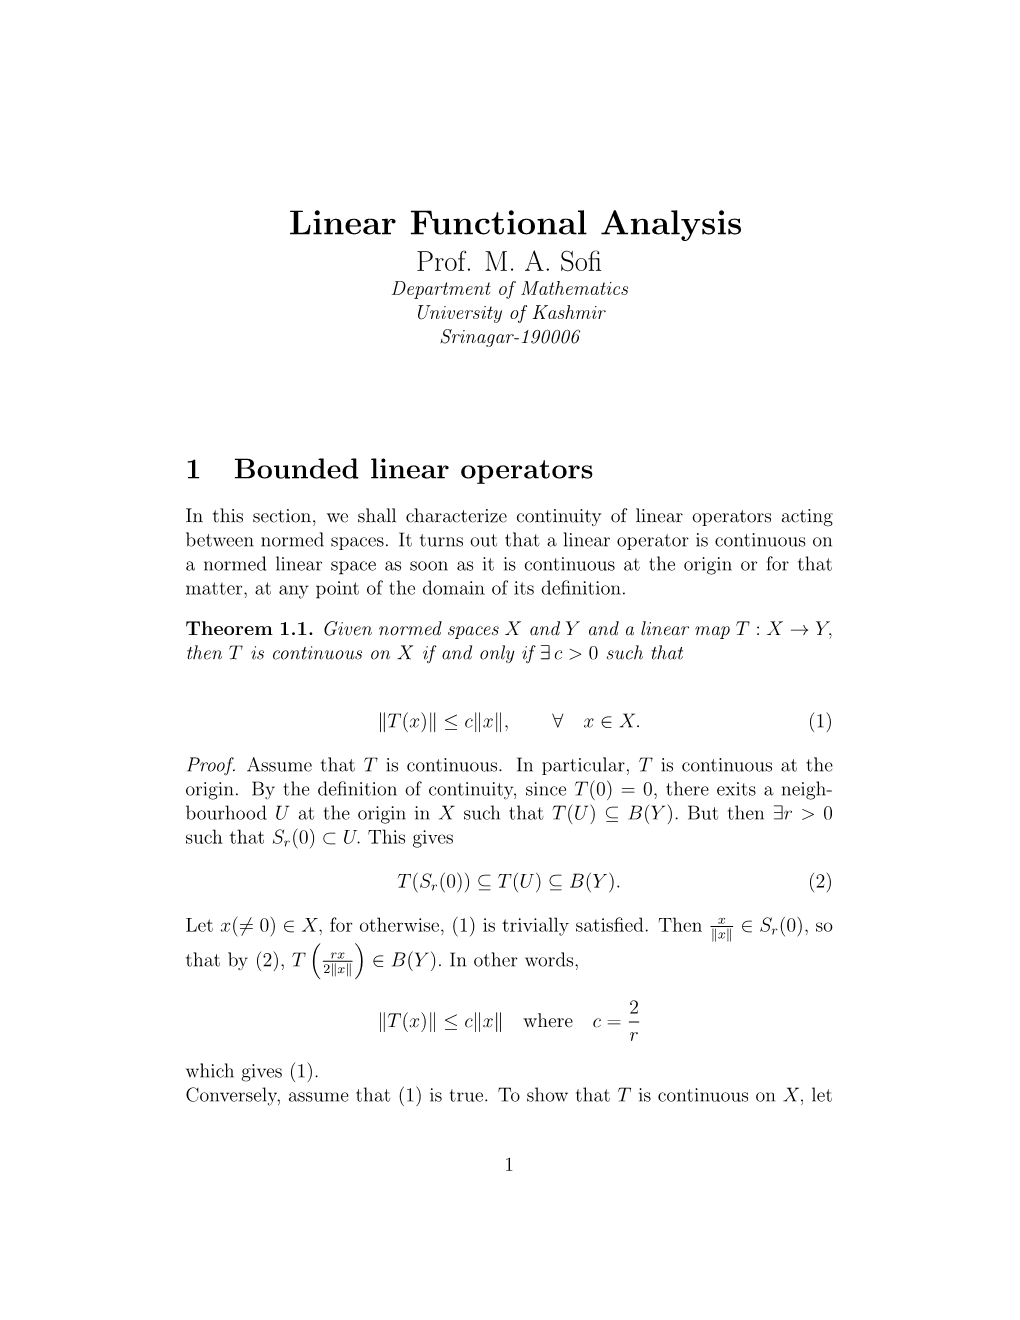 Notes on Linear Functional Analysis by M.A Sofi